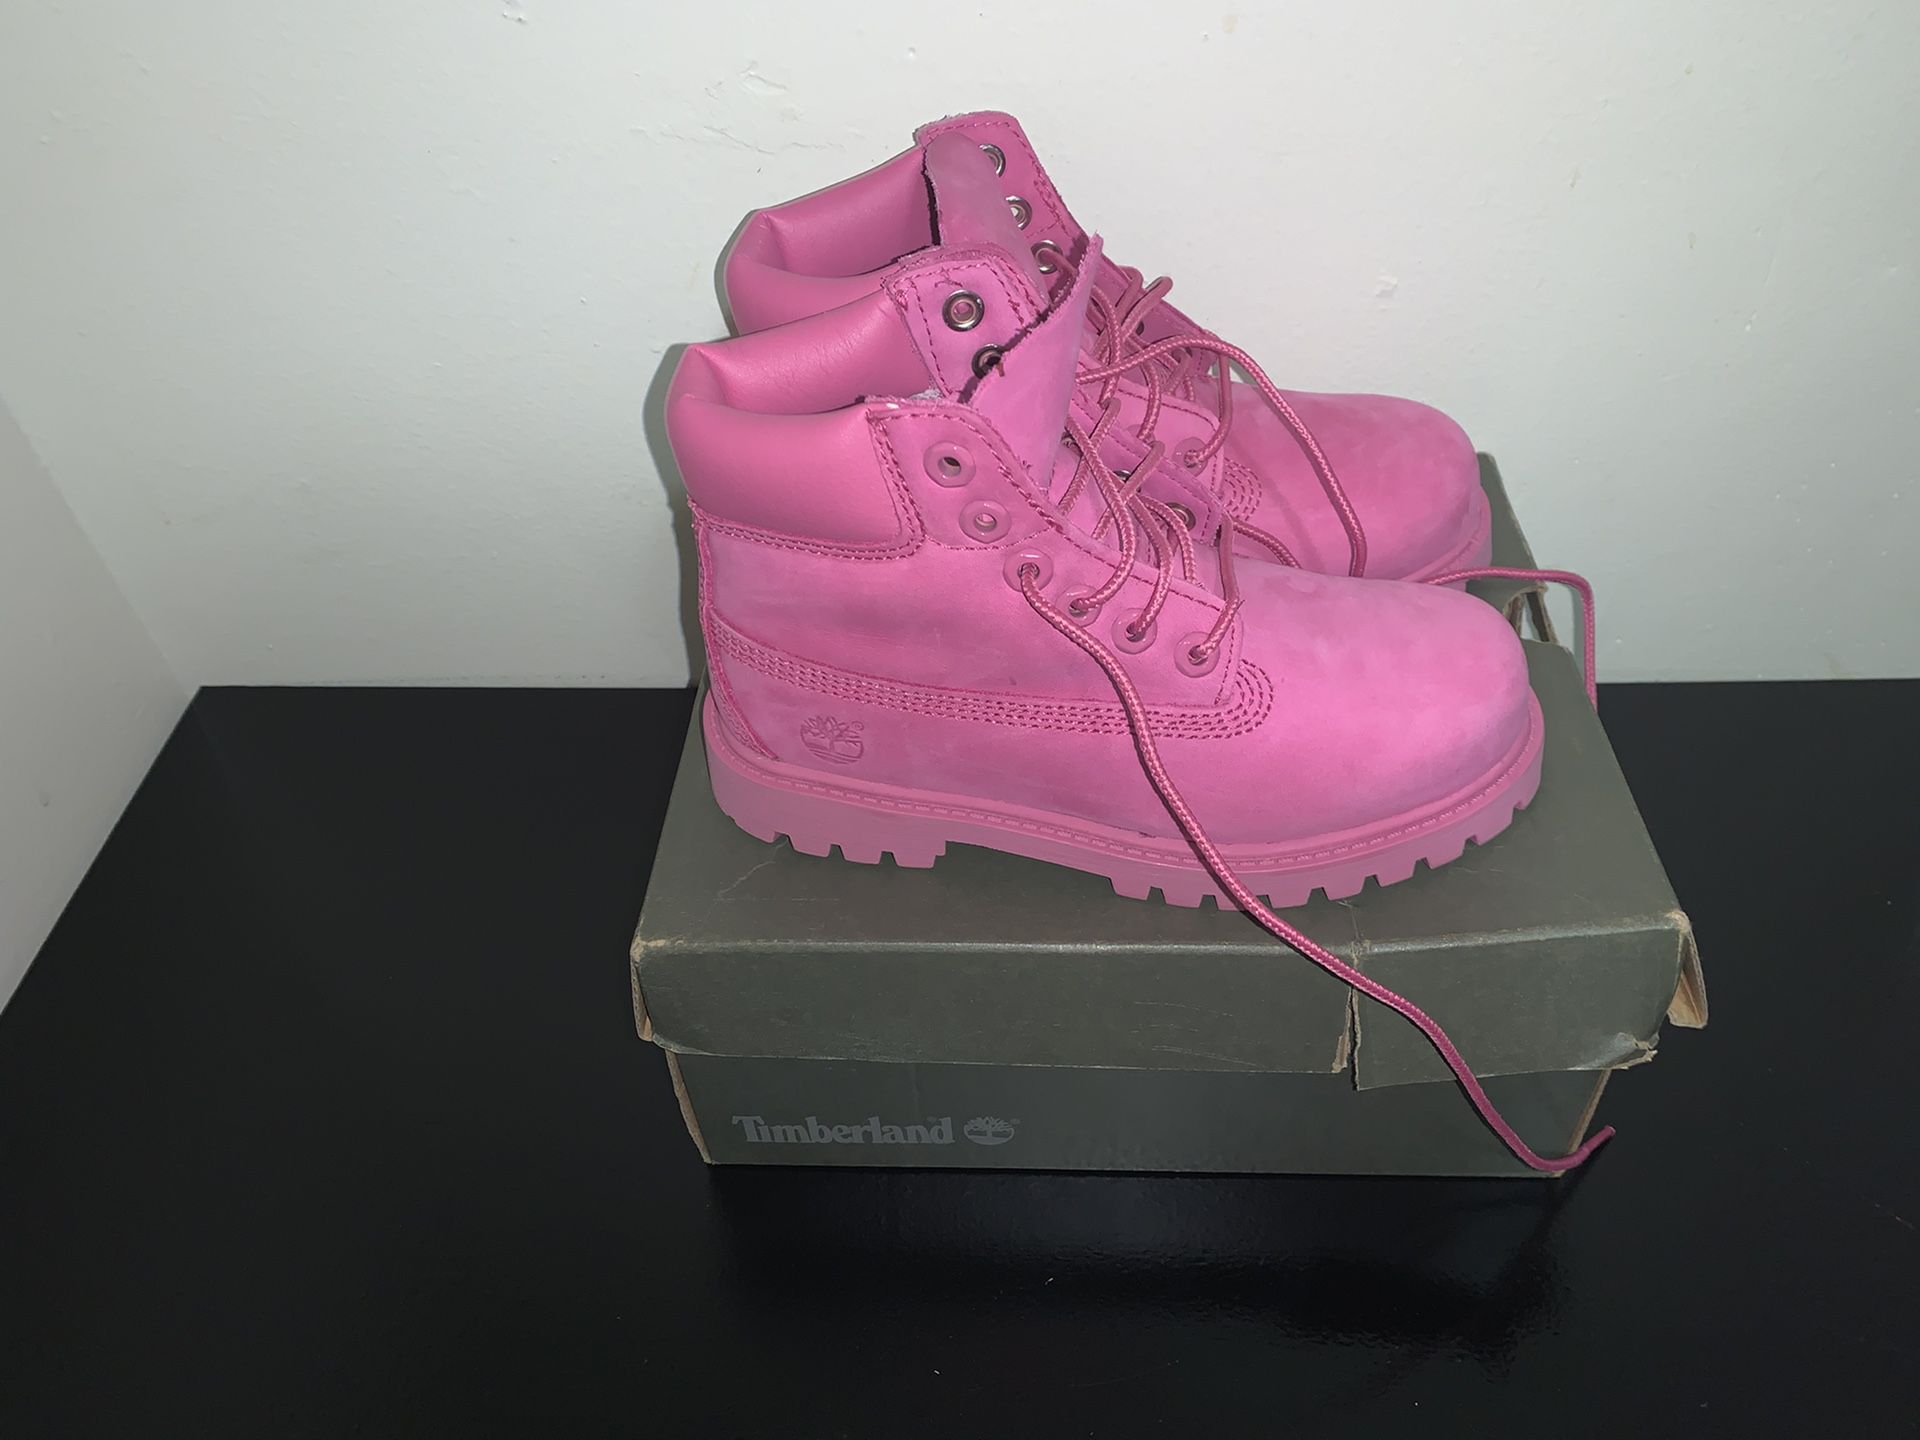 Brand New Timberland Boots Hot Pink Size 12c GIRLS